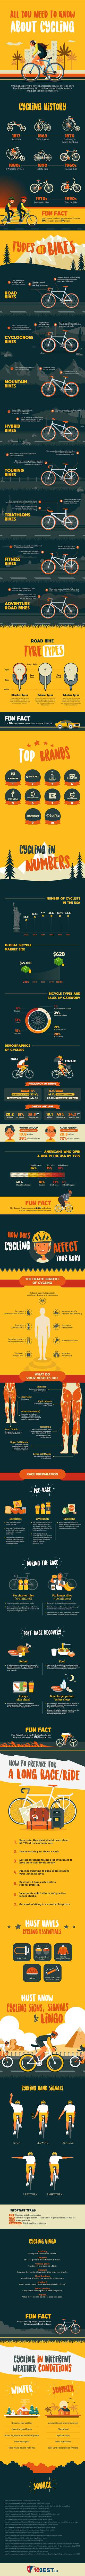 All You Need To Know About Cycling #infographic